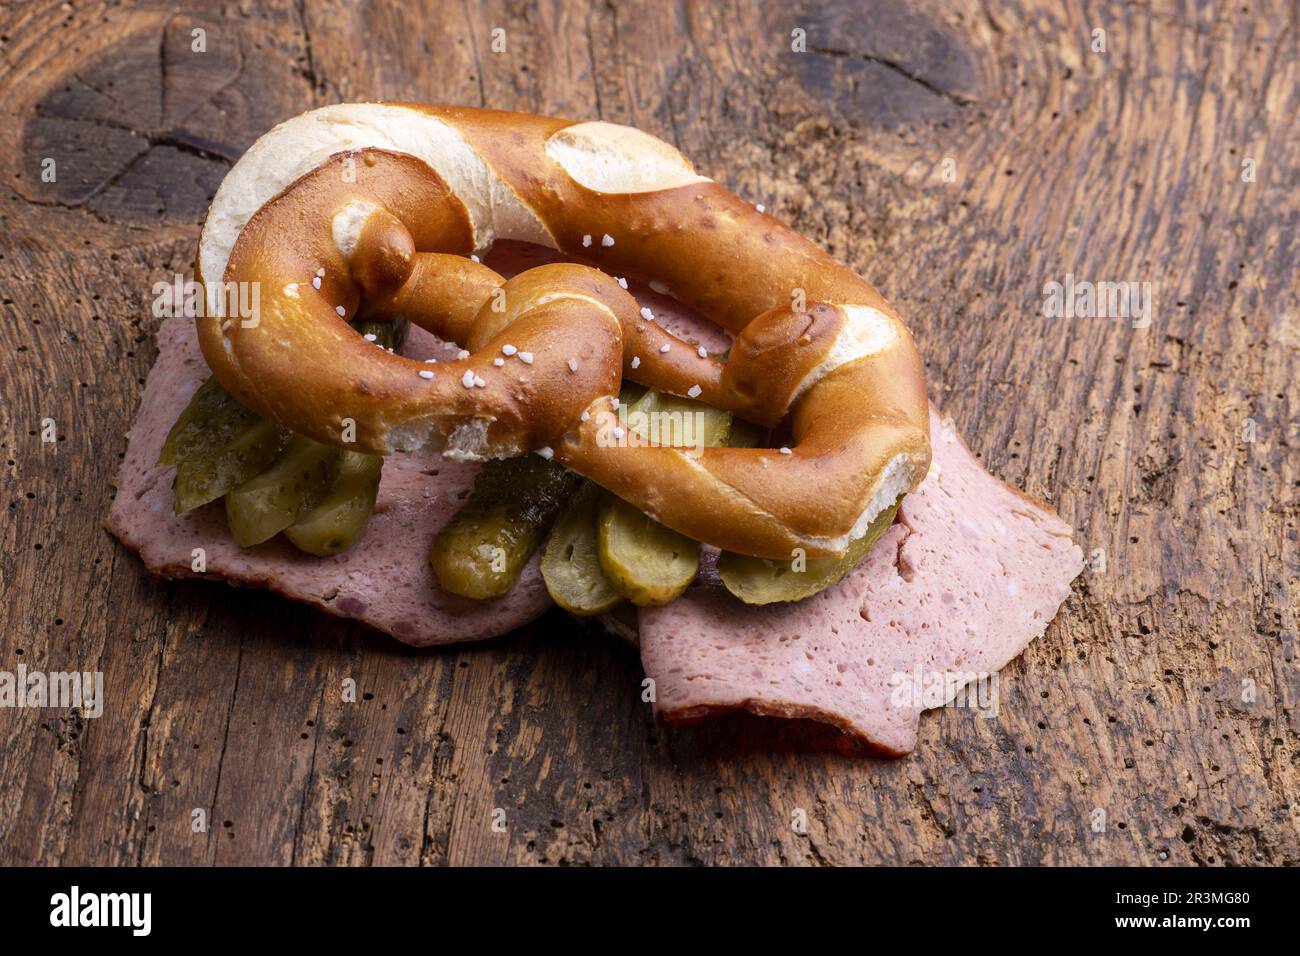 Meat loaf in a pretzel on wood Stock Photo